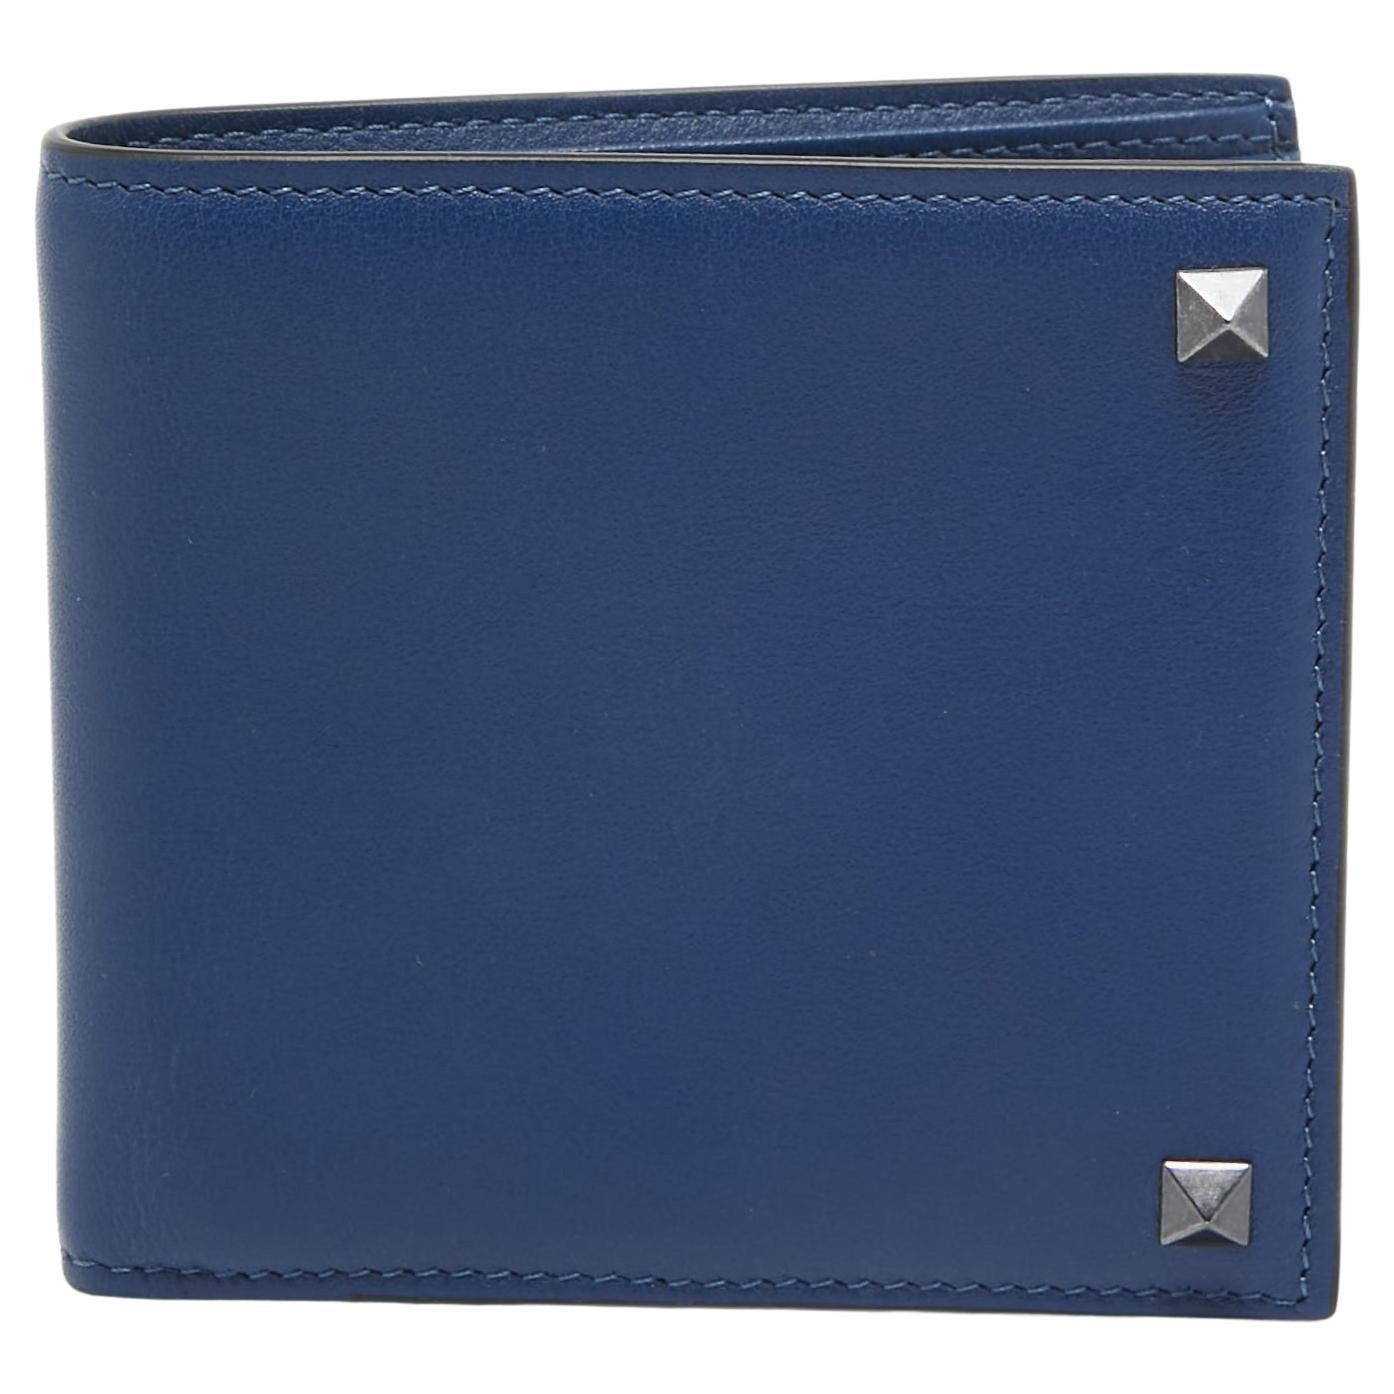 Valentino Navy Blue Leather Rockstud Bifold Wallet For Sale